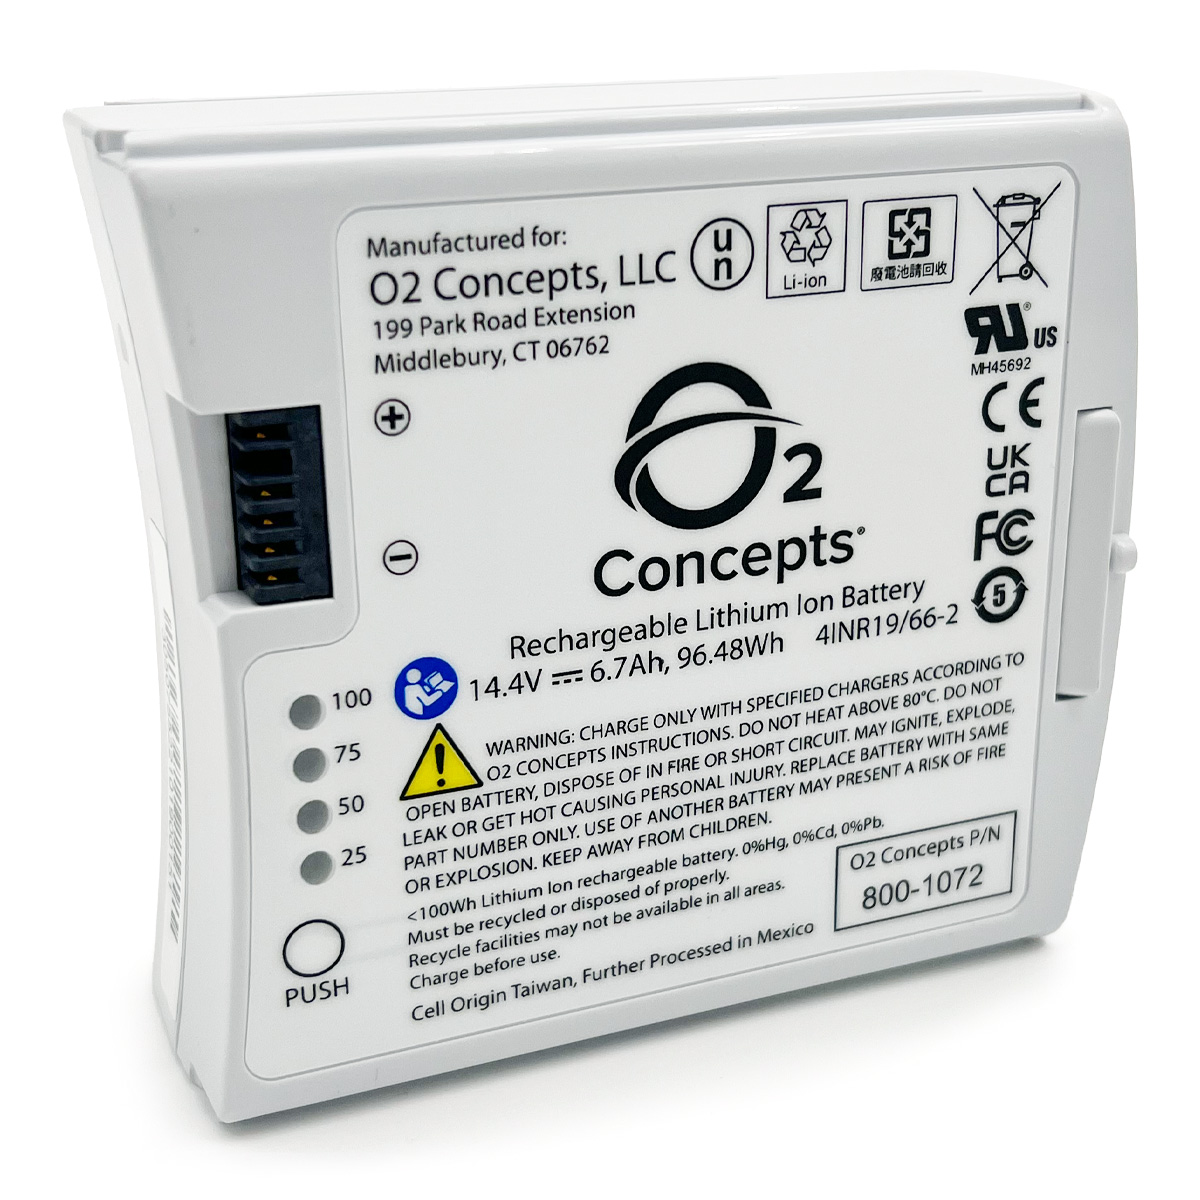 800 1072 Oxlife Liberty 2 Concentrator Battery 